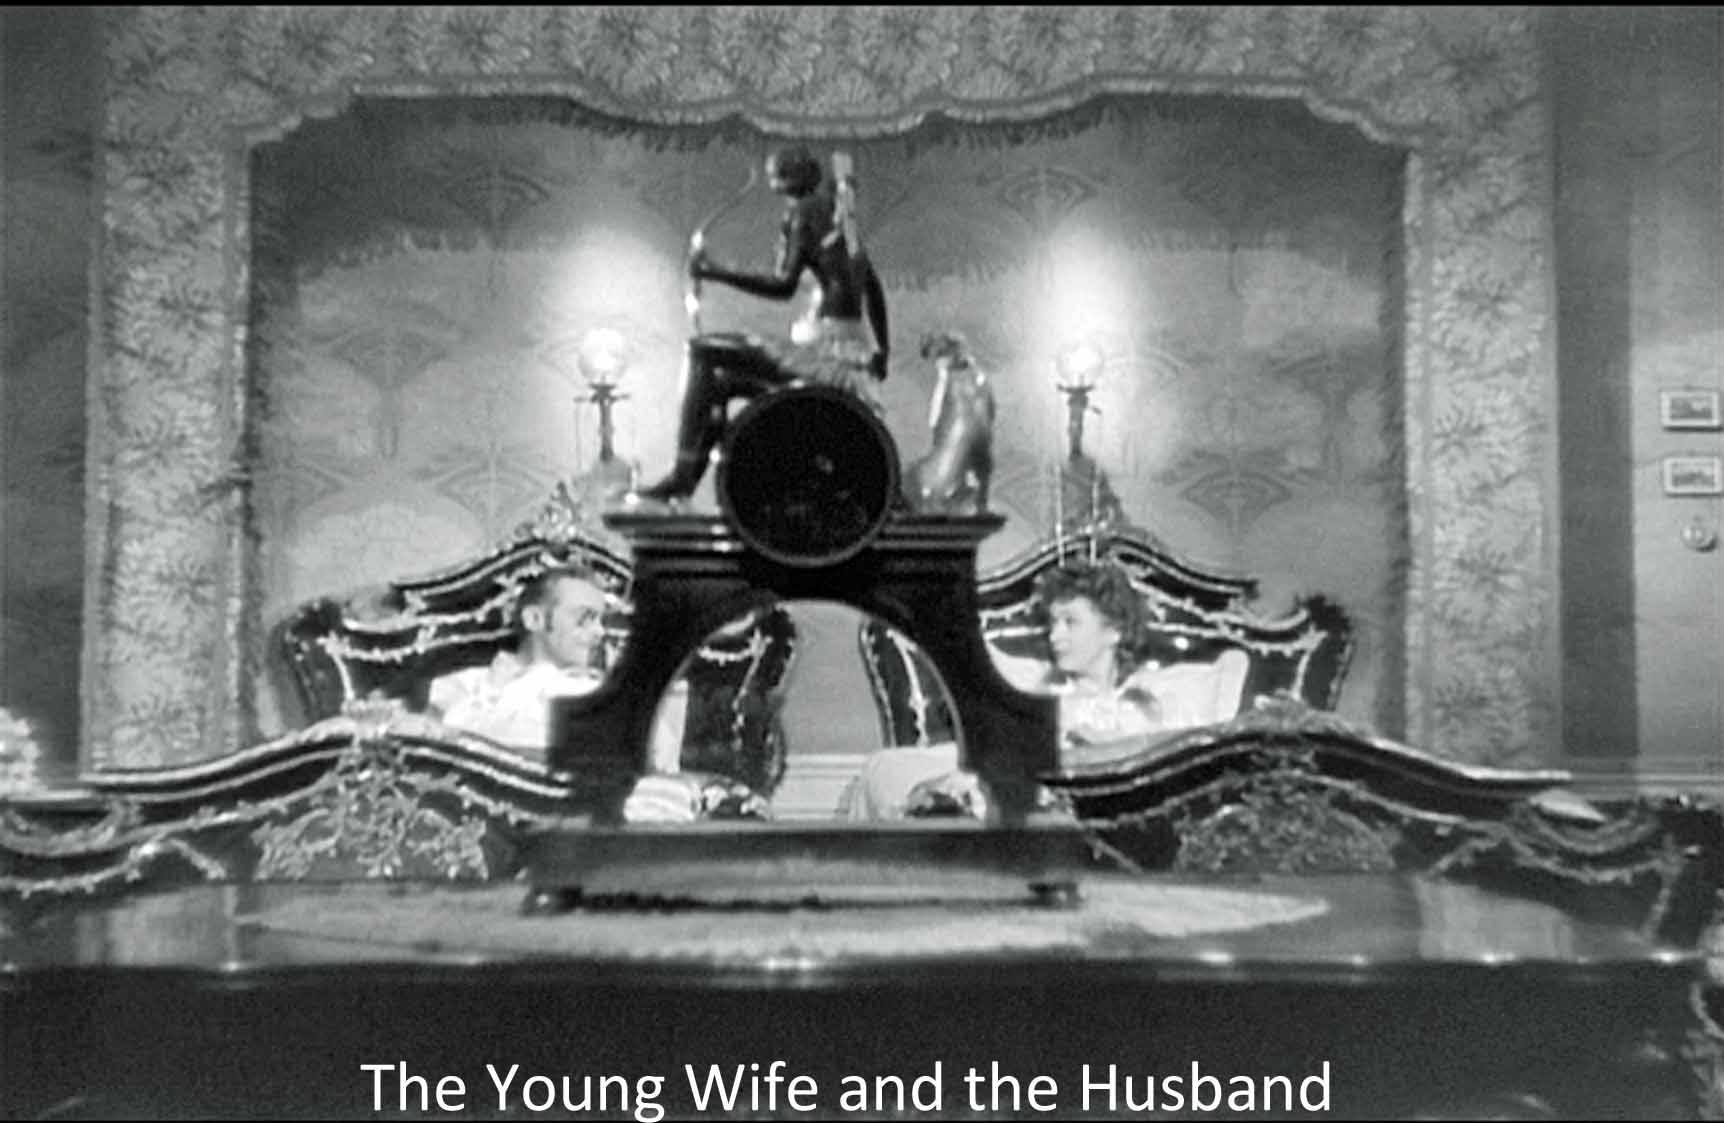 The Young Wife and the Husband